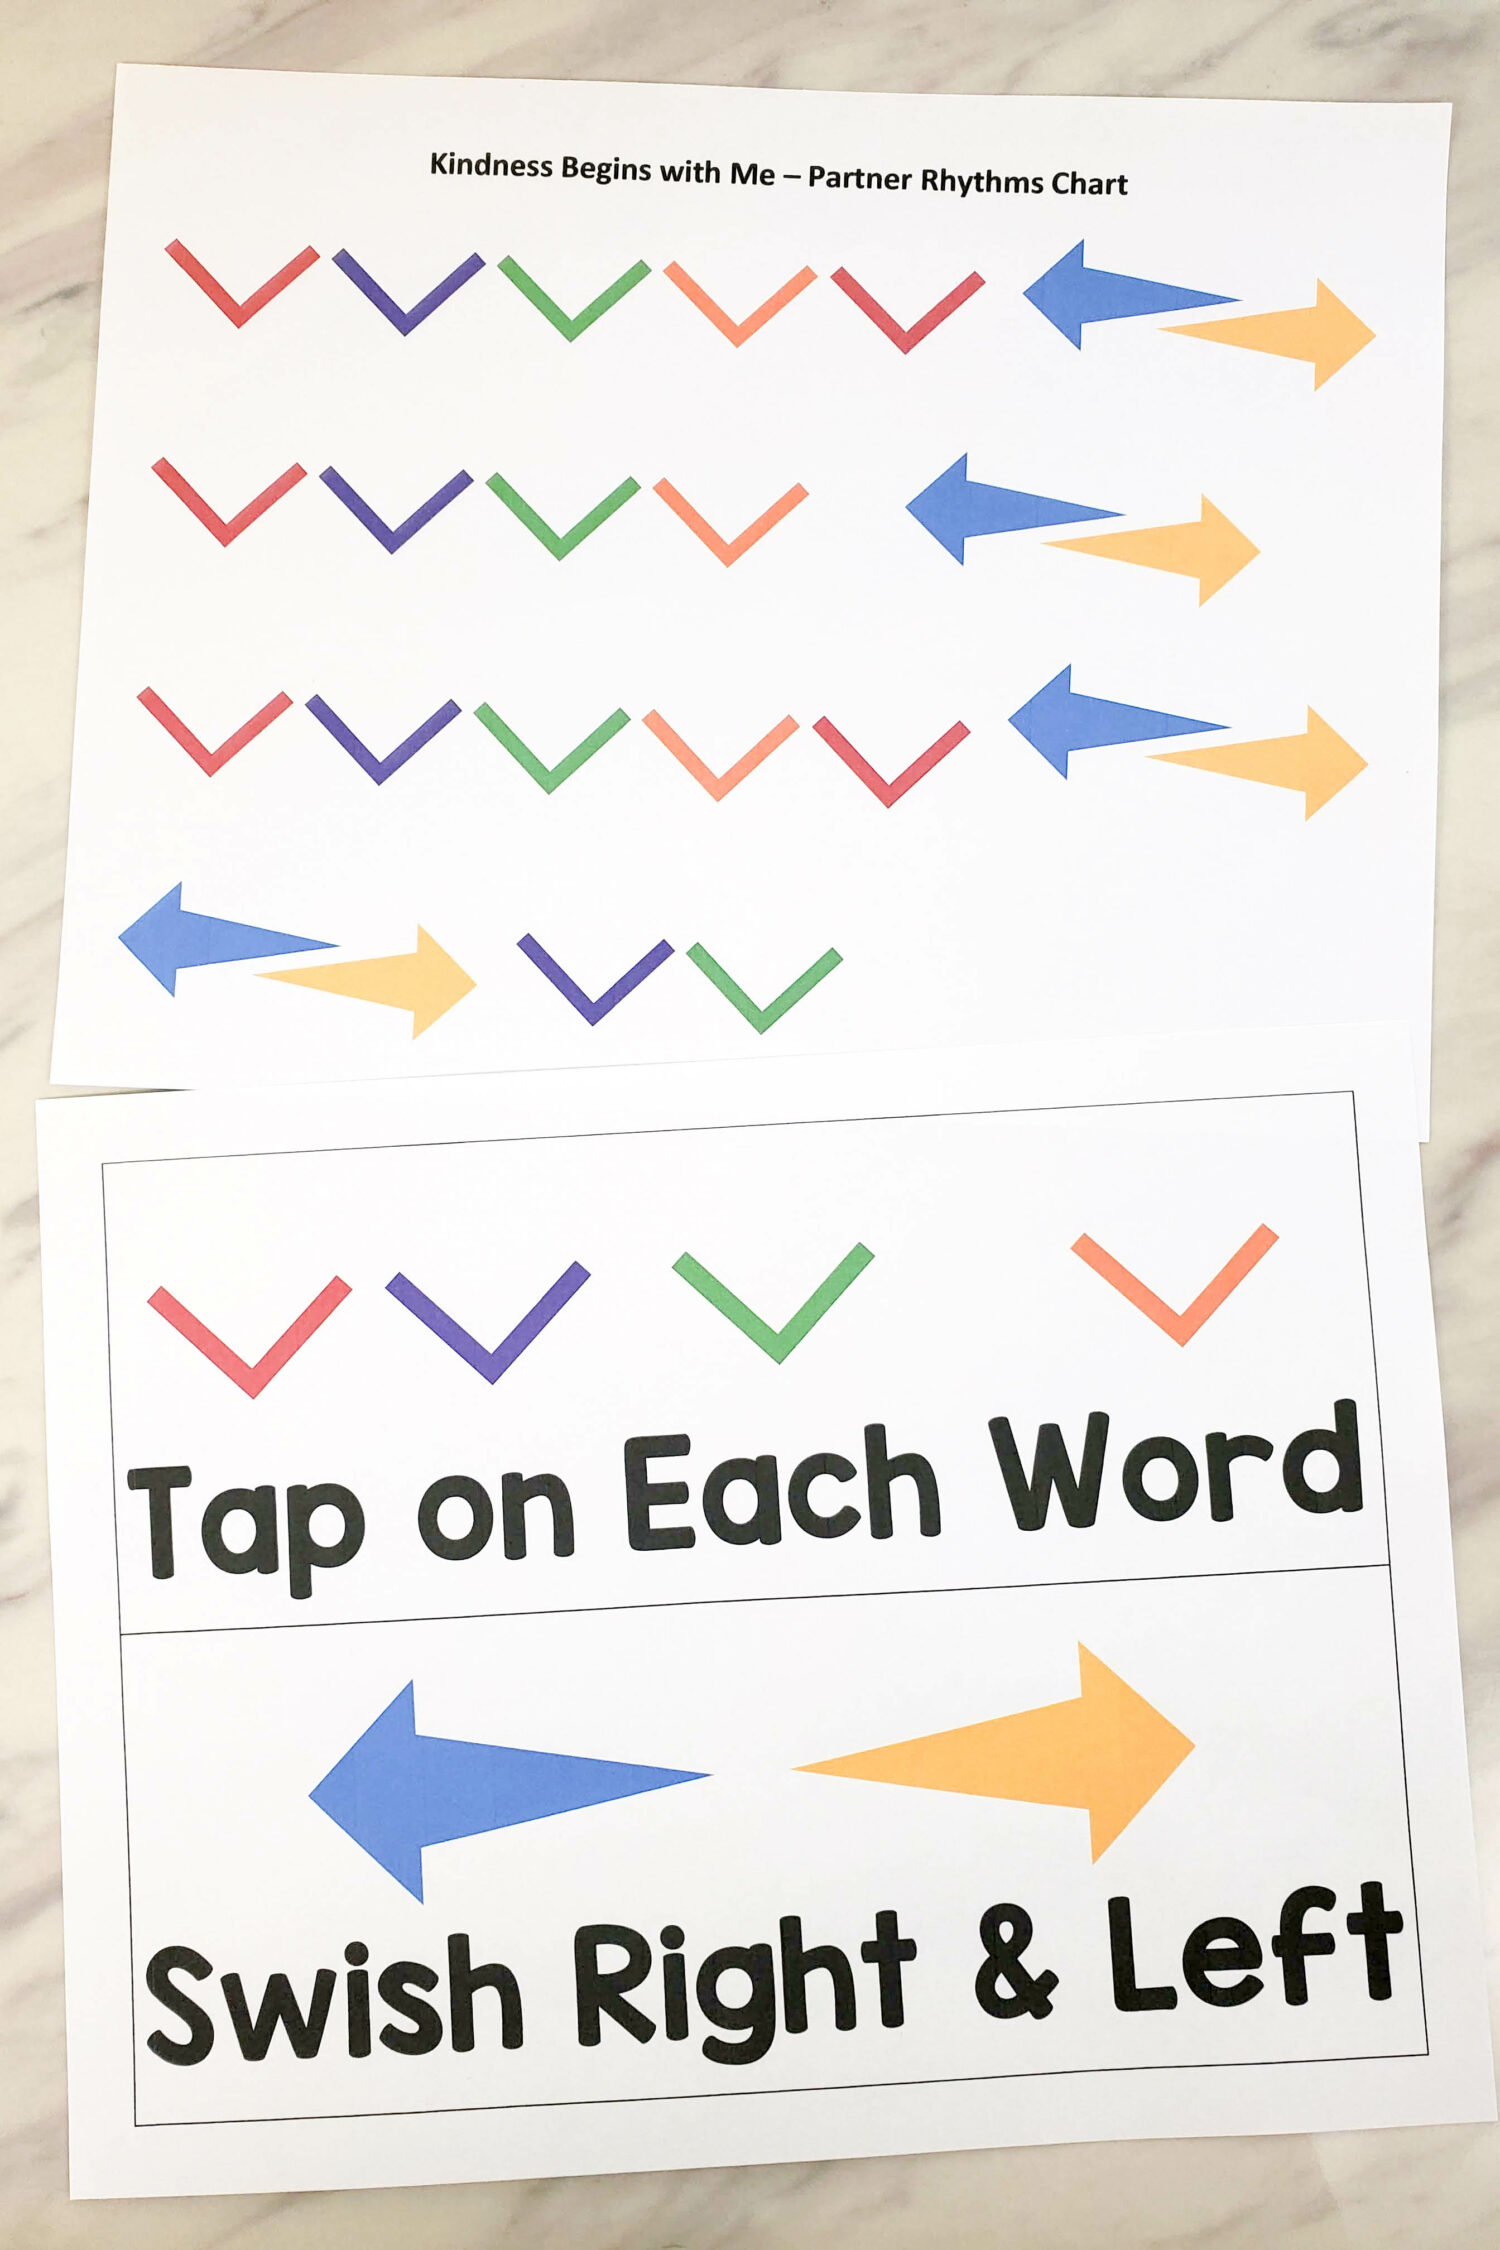 Kindness Begins with Me Partner Rhythms singing time activity! Bring in rhythm sticks and dance scarves (or alternates in the post) to add two different patterns following the melody and rhythm with fun actions! Includes a printable pattern chart for LDS Primary music leaders.